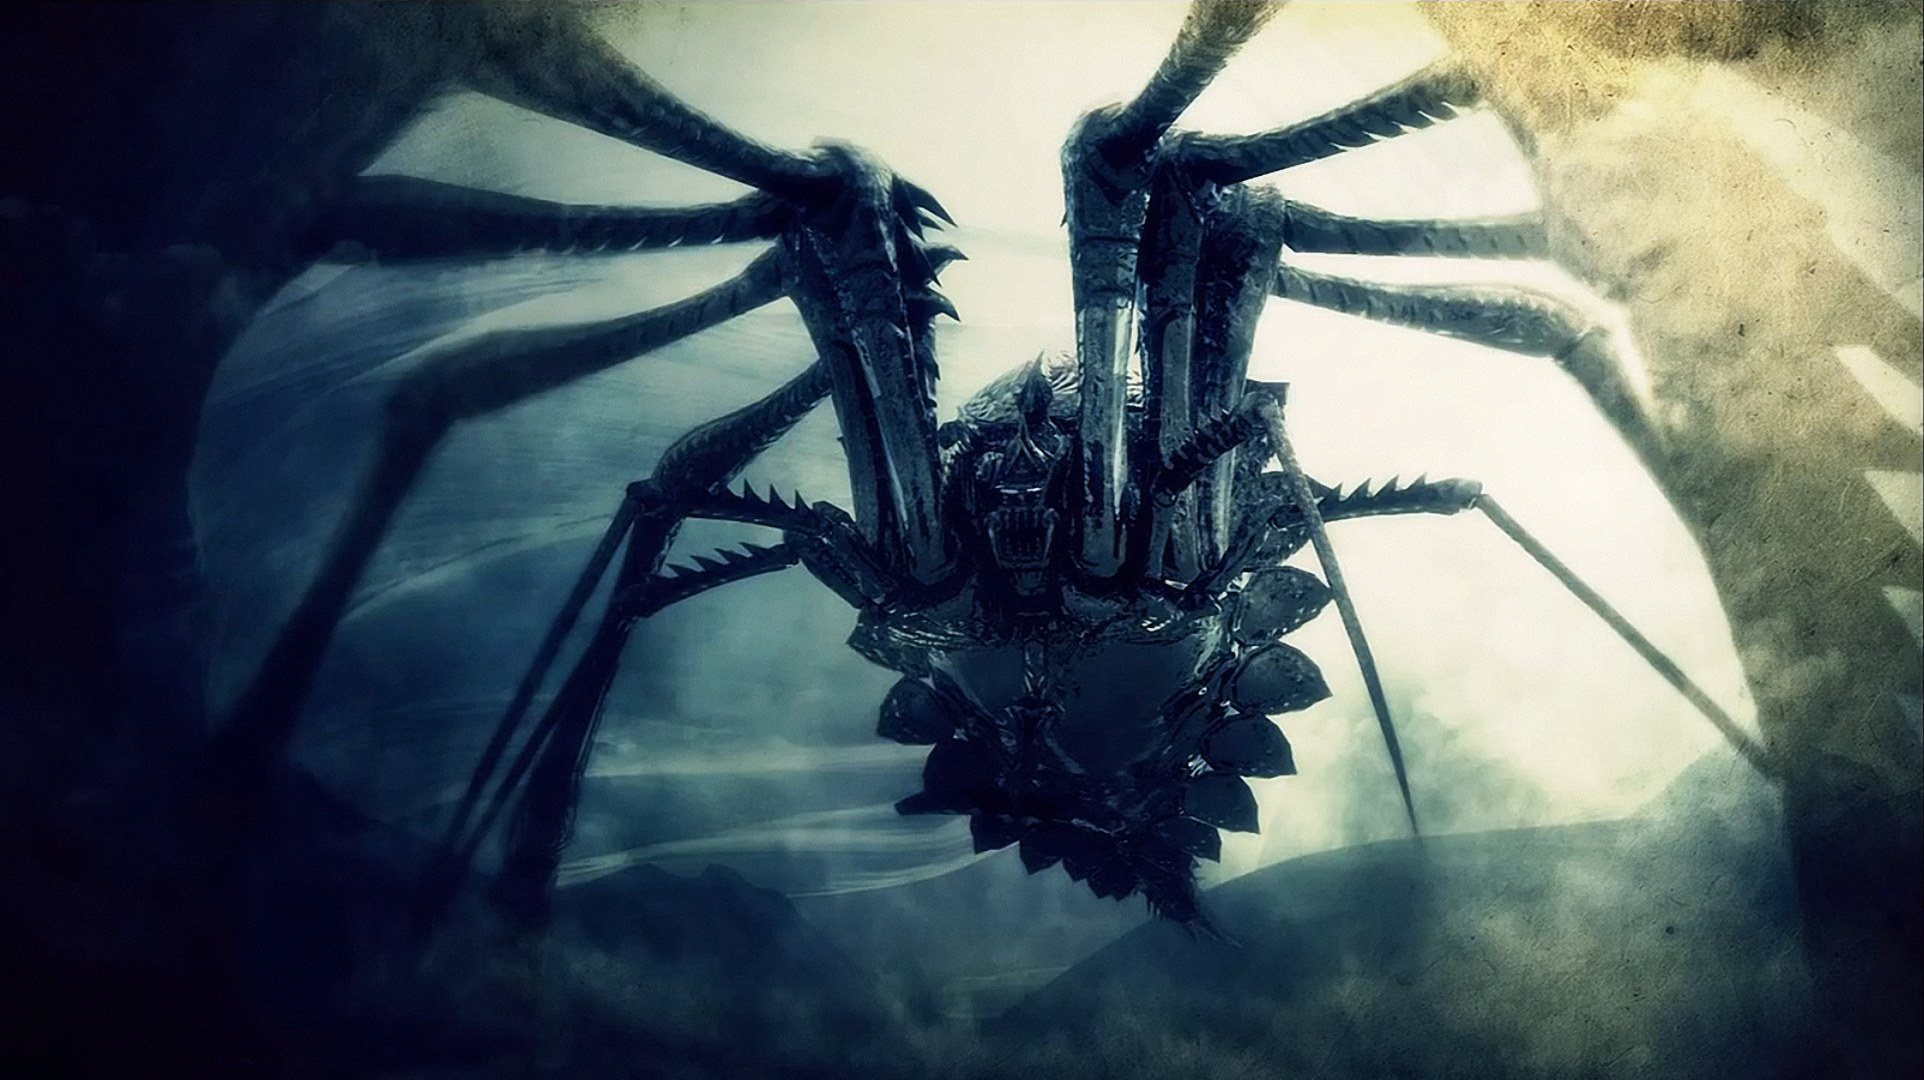 Armor Spider Full HD Wallpaper and Background Image | 1924x1080 | ID:165533